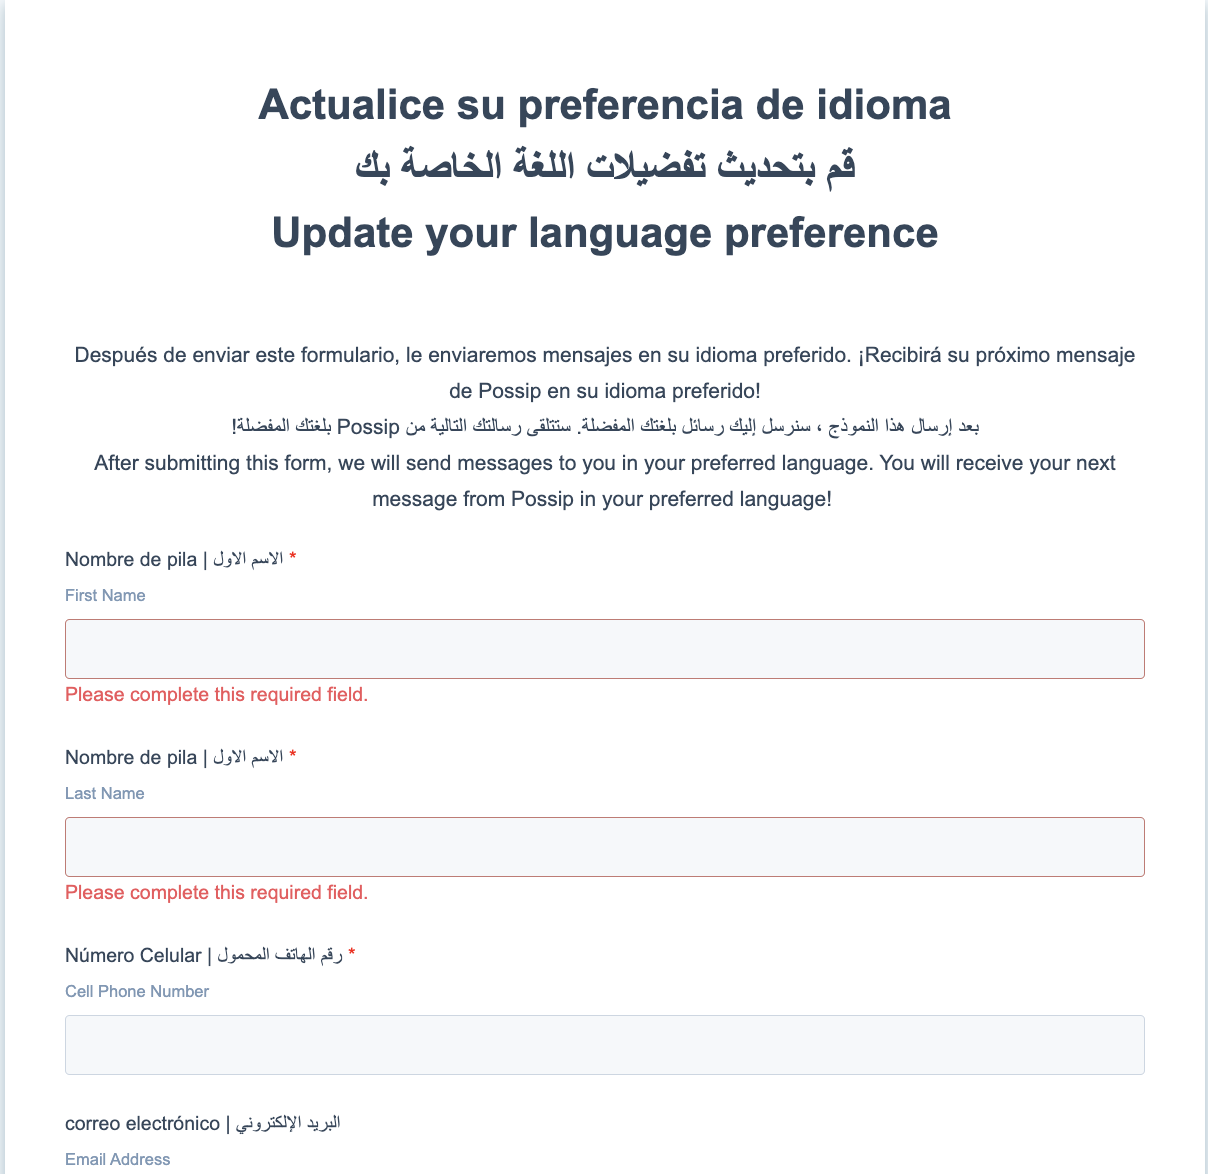 A screenshot of the language preference update form.